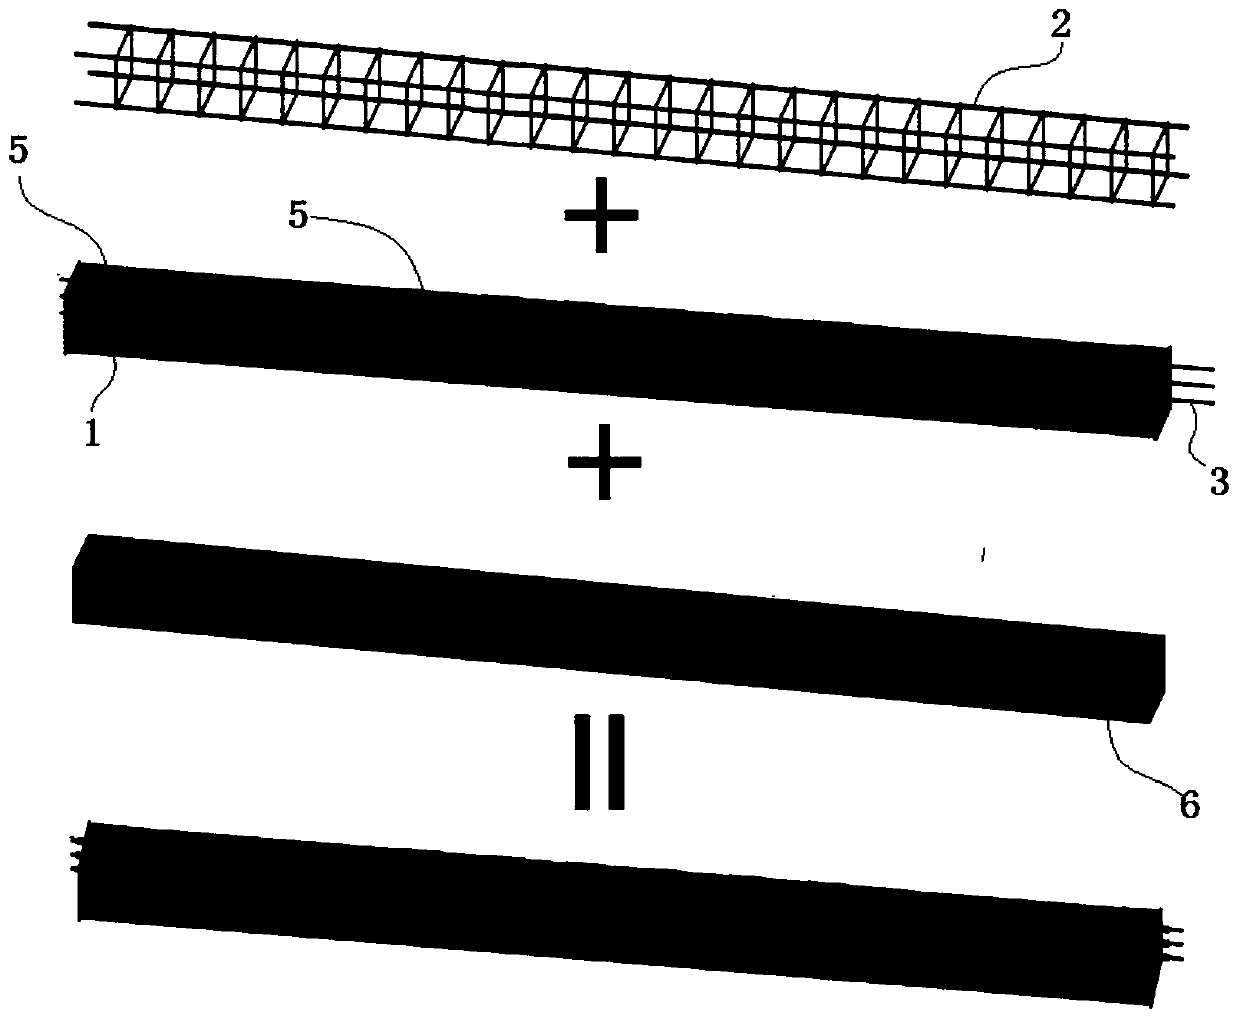 U-shaped thin-wall steel-prestress reinforced concrete combined bent cap and thin-wall steel tube concrete pier node structure and construction process